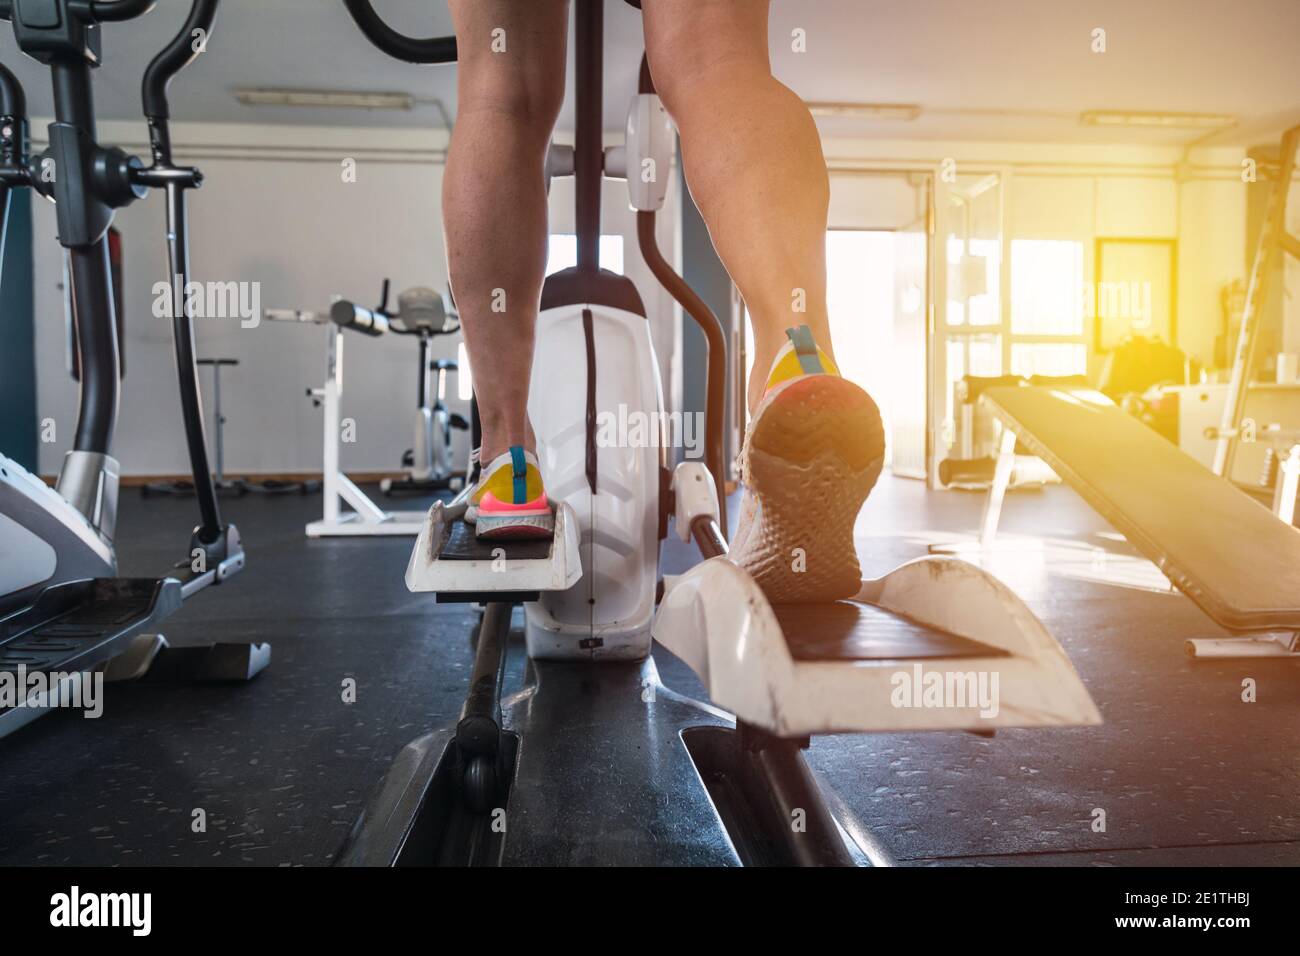 Young male using elliptical.Concept of health and well-being. Stock Photo